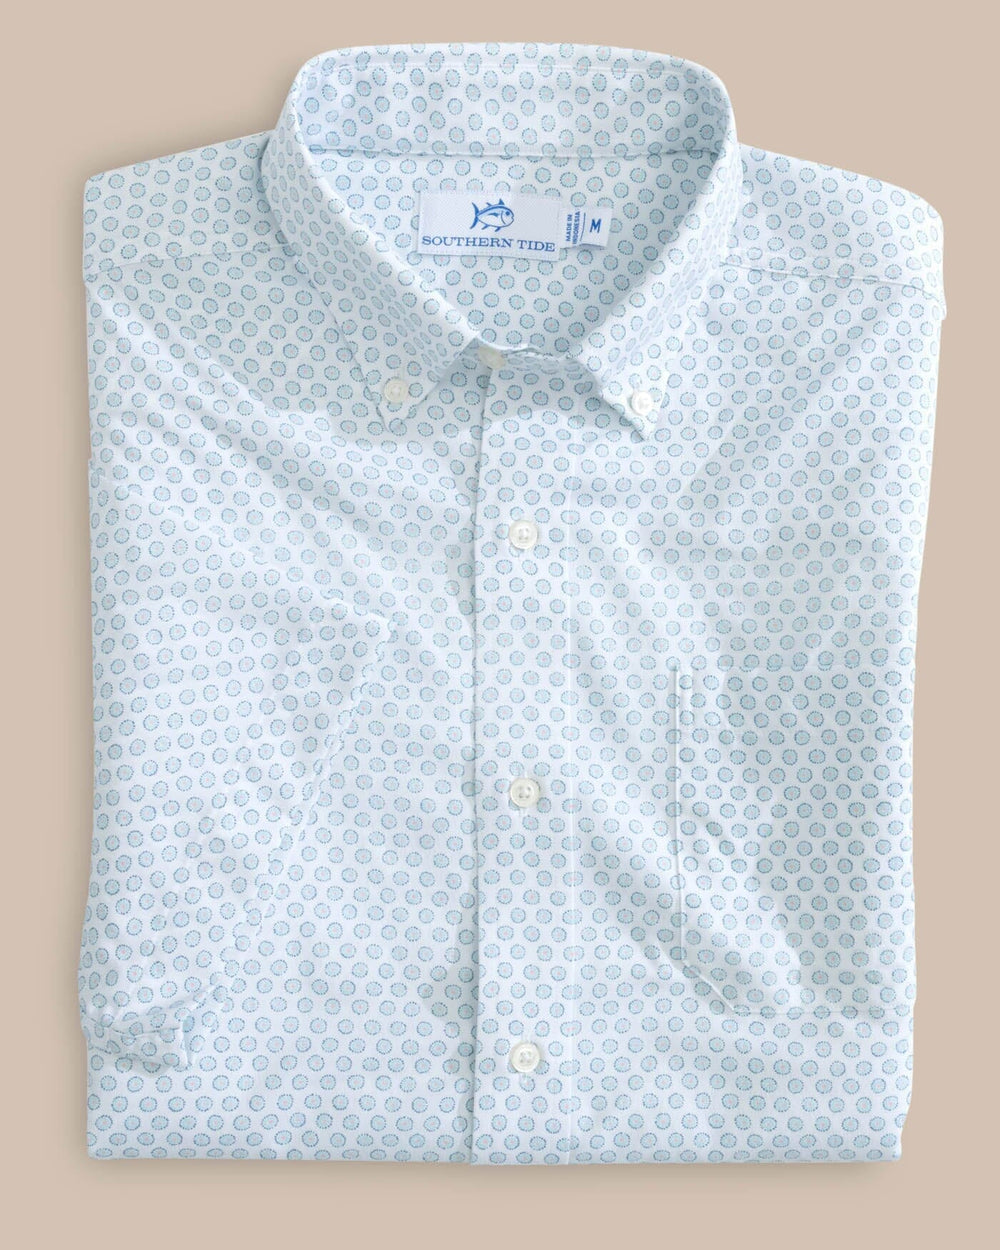 The front view of the Southern Tide brrr Intercoastal Floral To See Short Sleeve Sportshirt by Southern Tide - Wake Blue